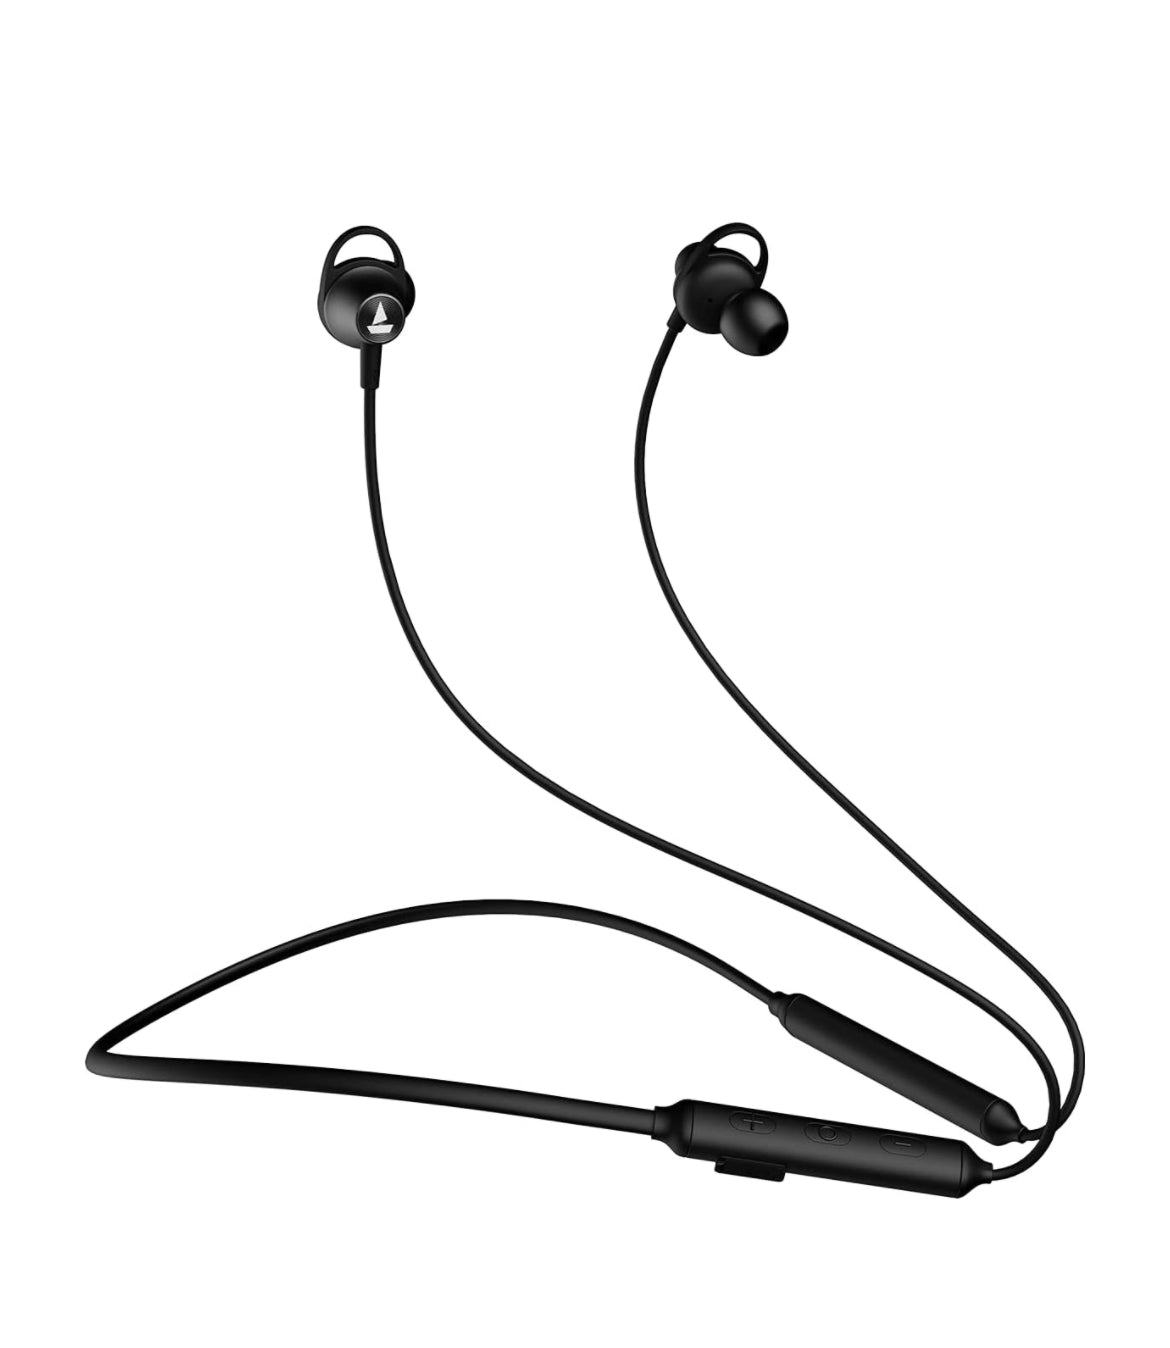 boAt Rockerz 245v2 Bluetooth Wireless in Ear Earphones with Upto 8 Hours Playback, 12mm Drivers, IPX5, Magnetic Eartips, Integrated Controls and Lightweight Design with Mic